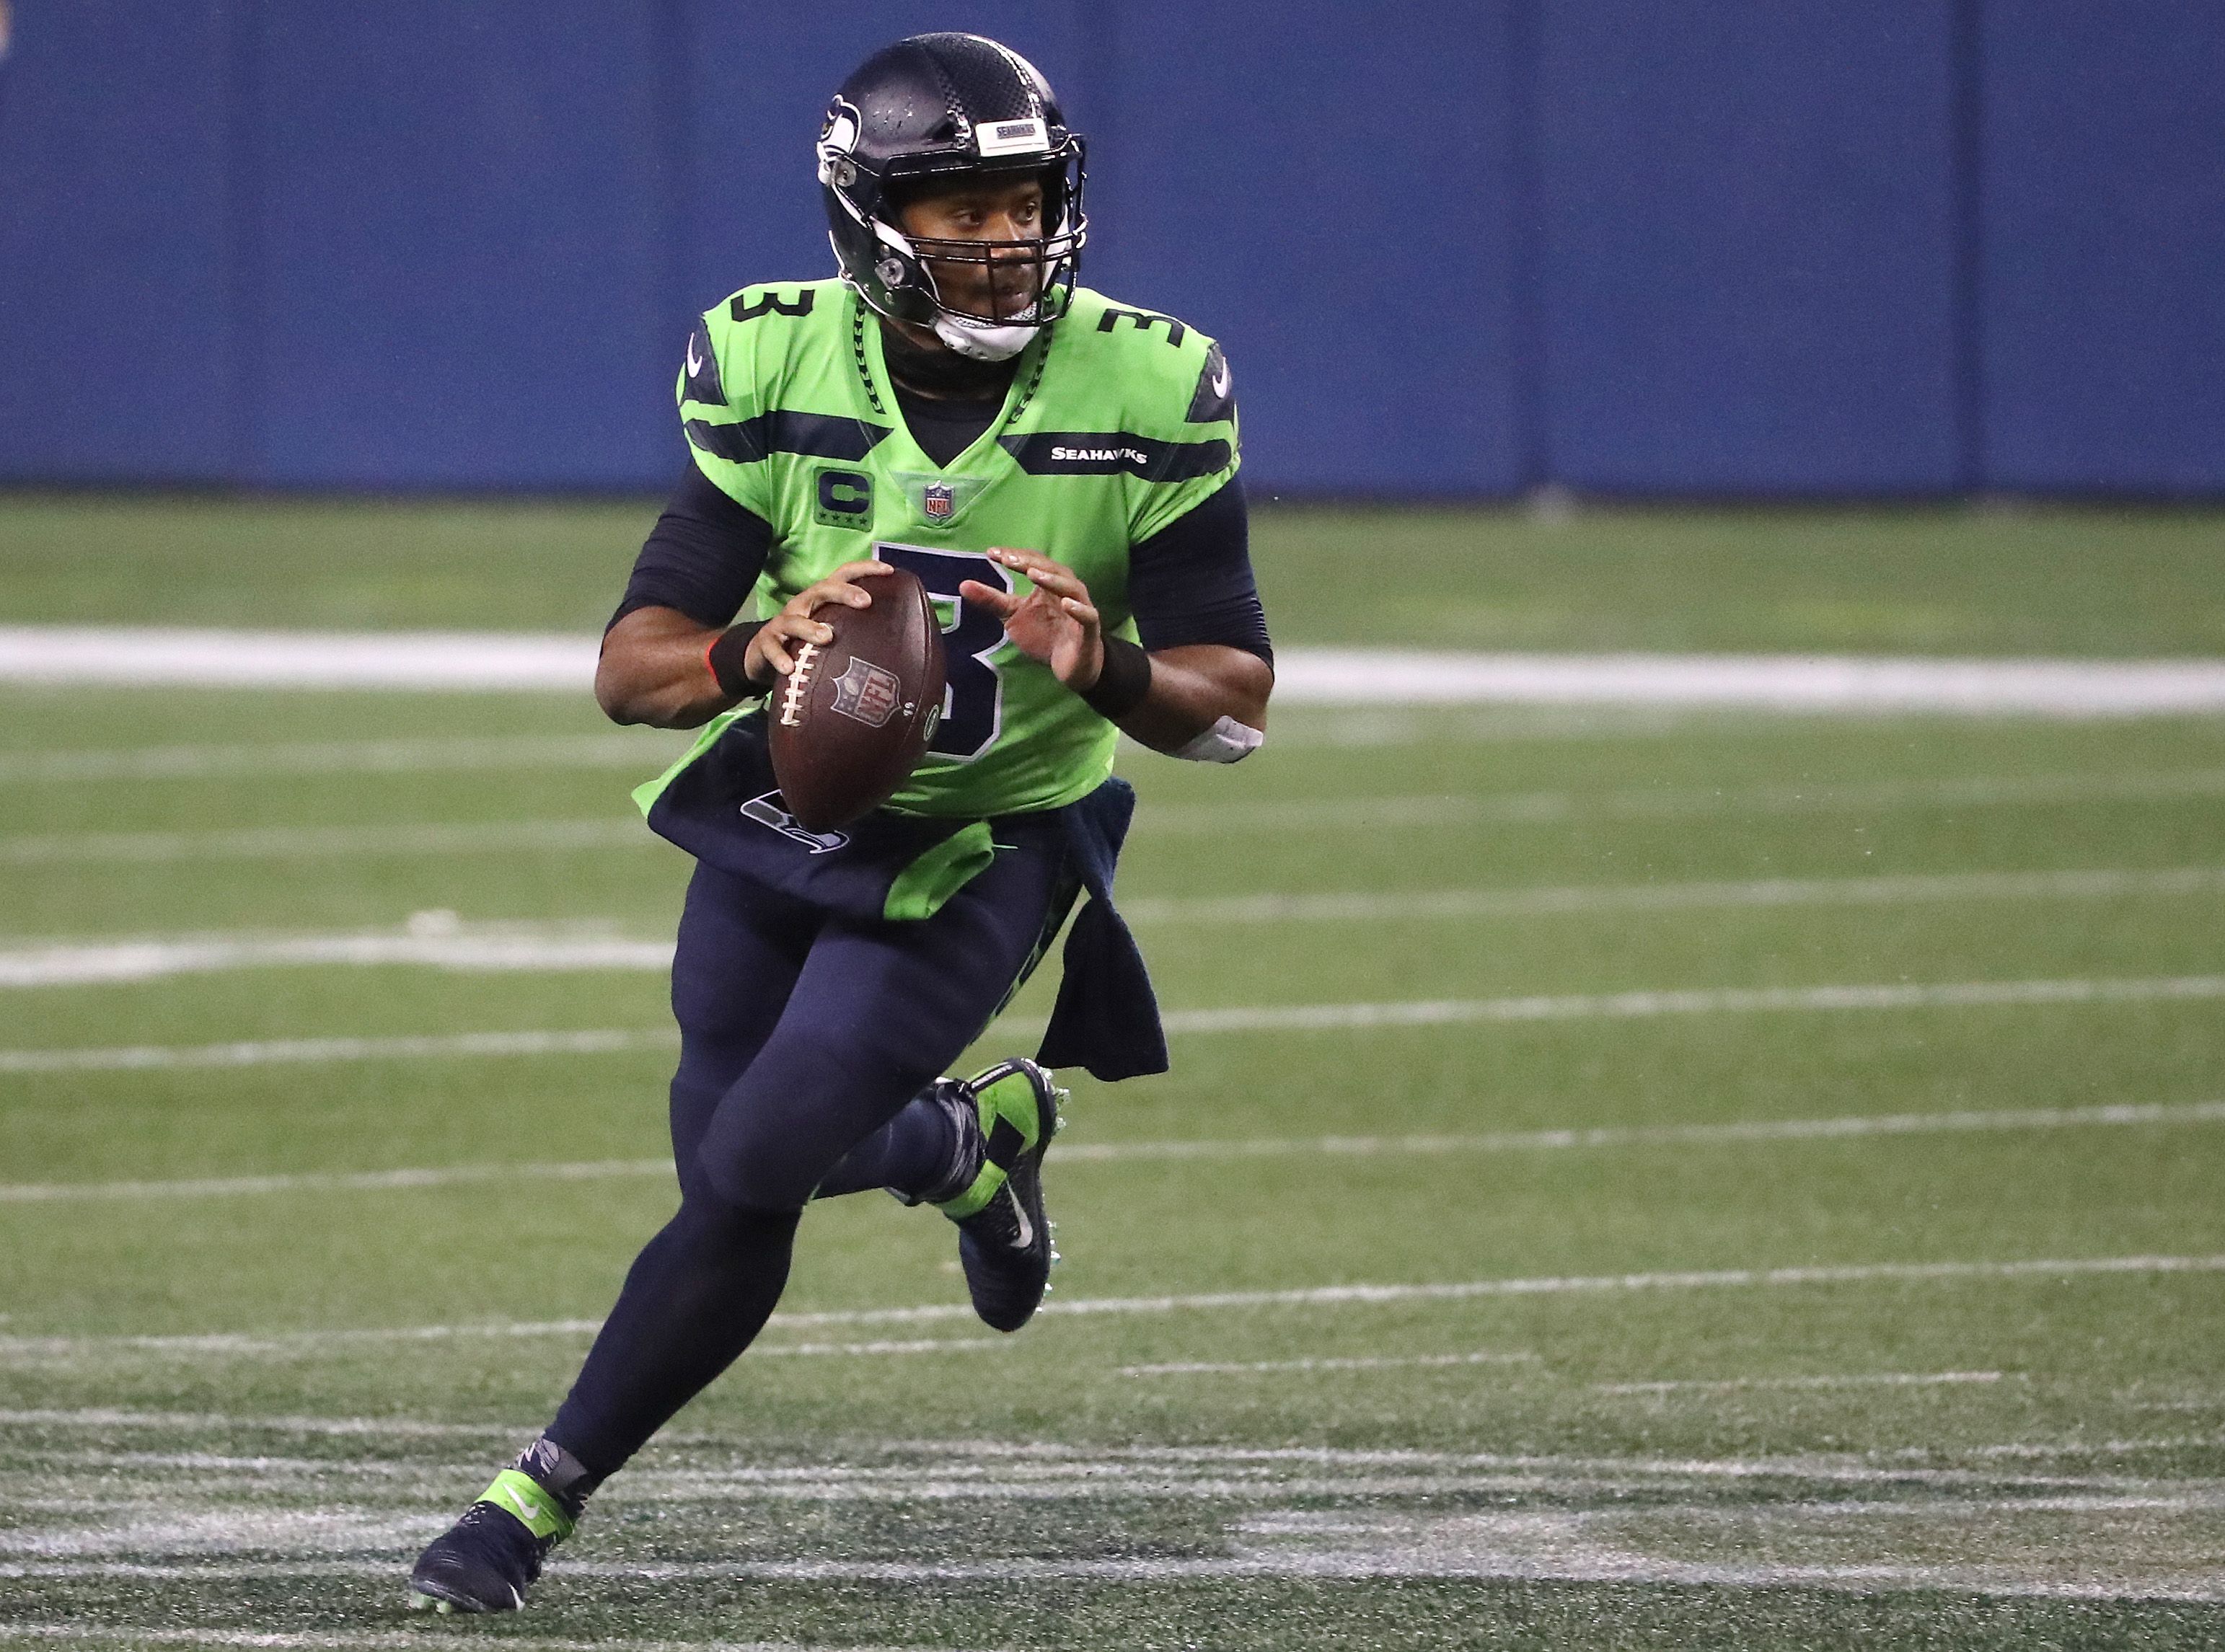 Russell Wilson looks to throw a pass in an NFL game.